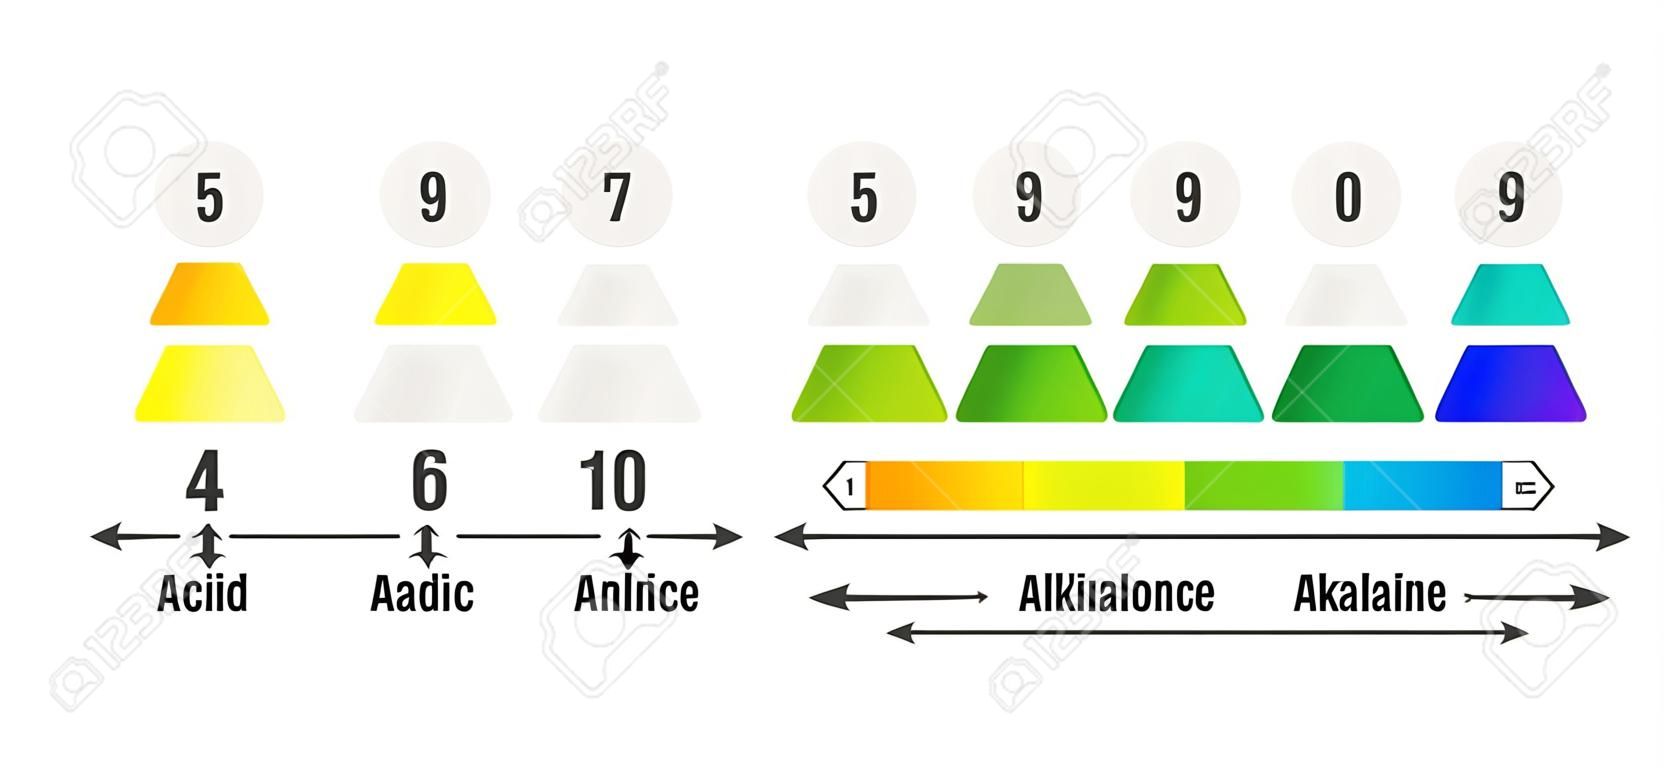 pH value scale chart for acid and alkaline solutions, acid-base balance infographic